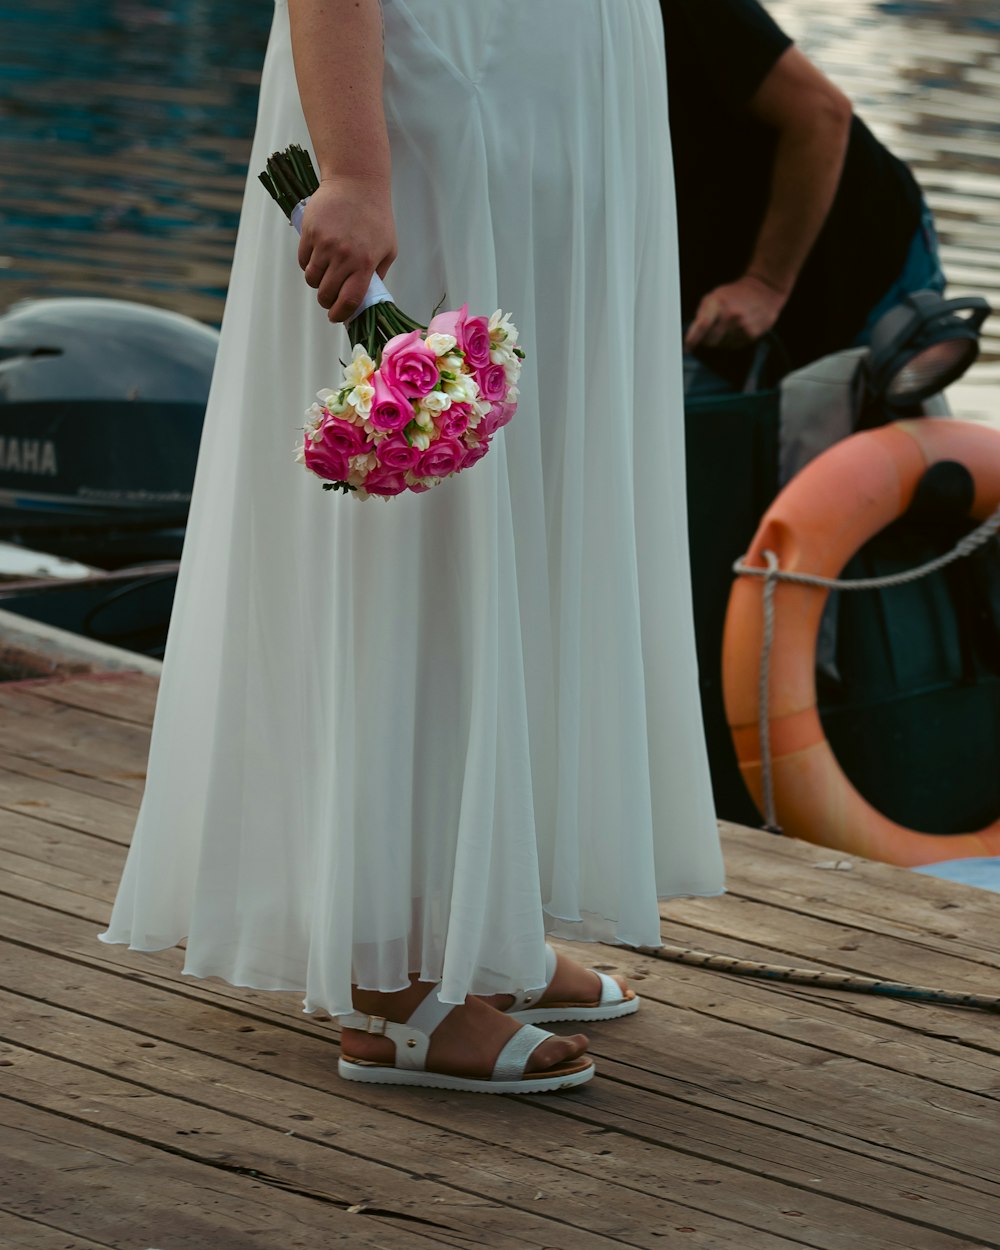 a person in a white dress holding a bouquet of flowers